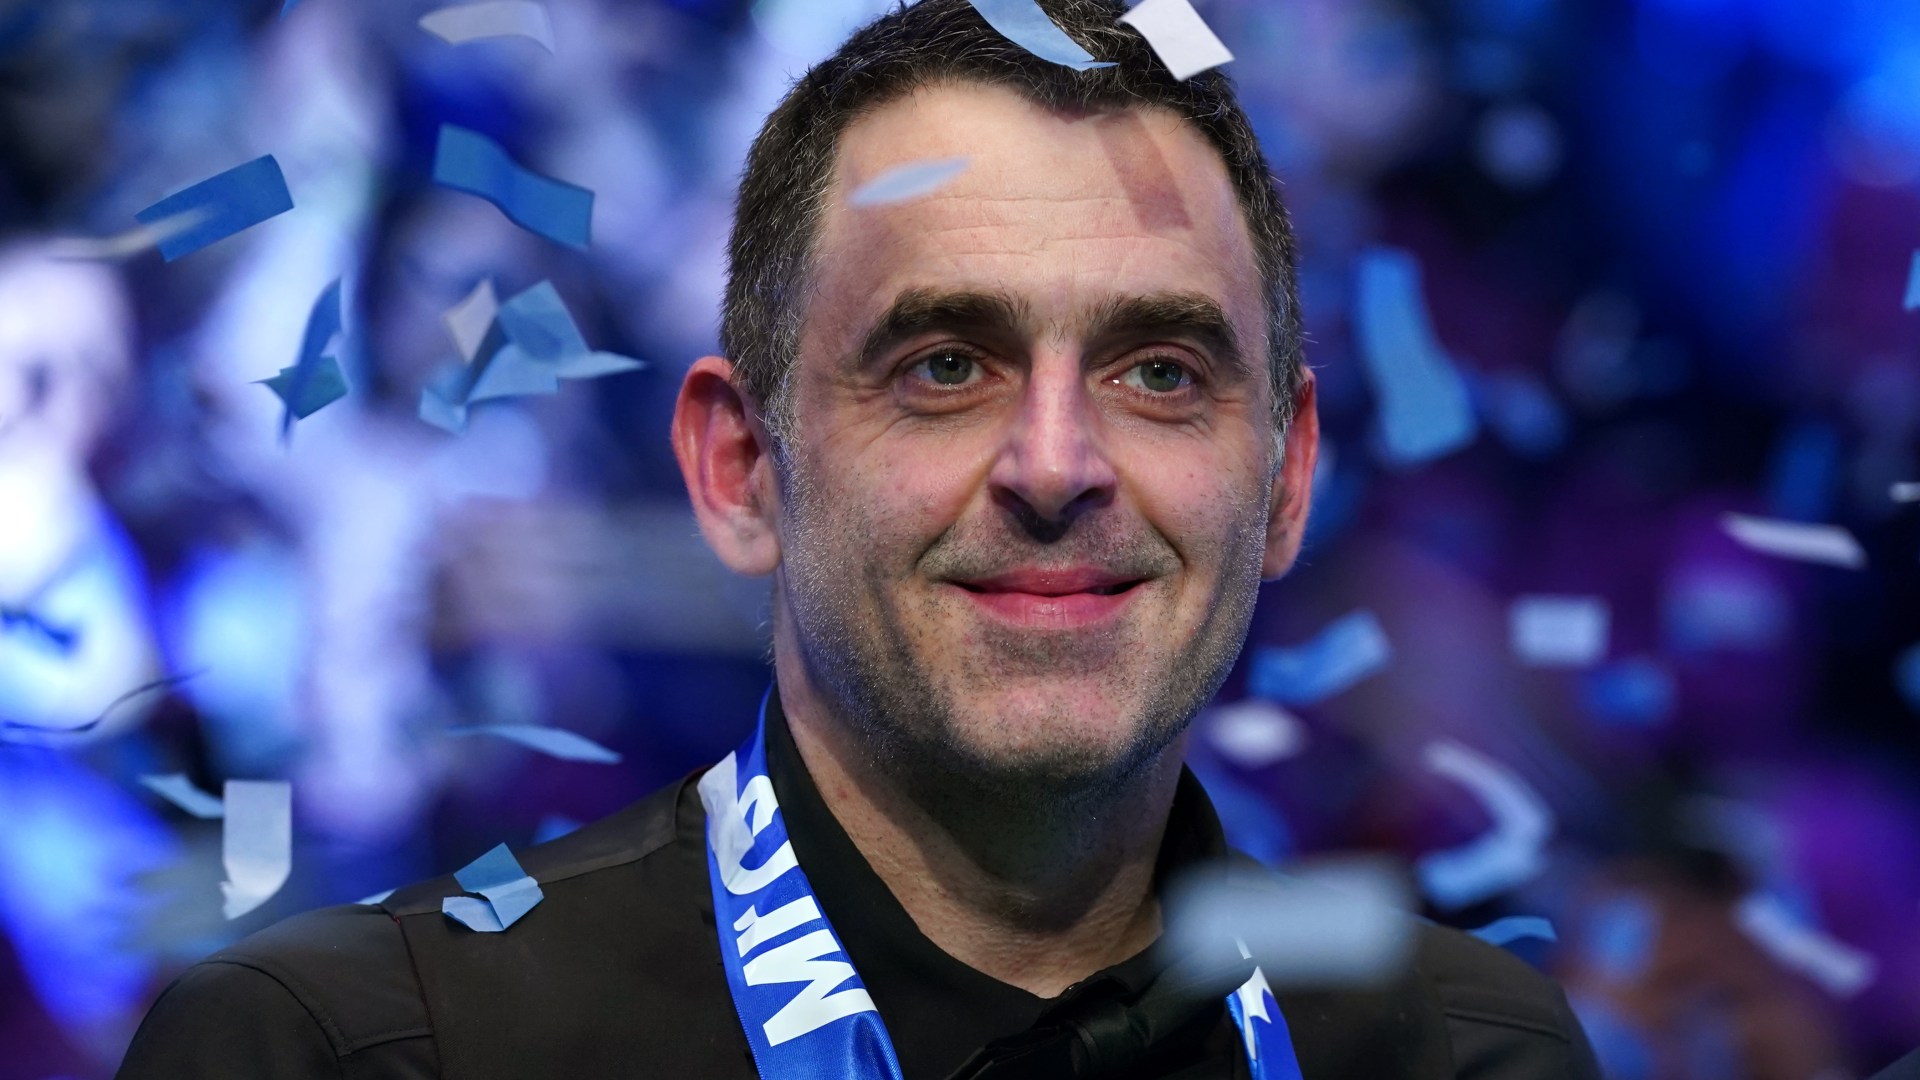 World Open Snooker LIVE RESULTS: Latest scores and schedule as Ronnie O’Sullivan gets charge underway